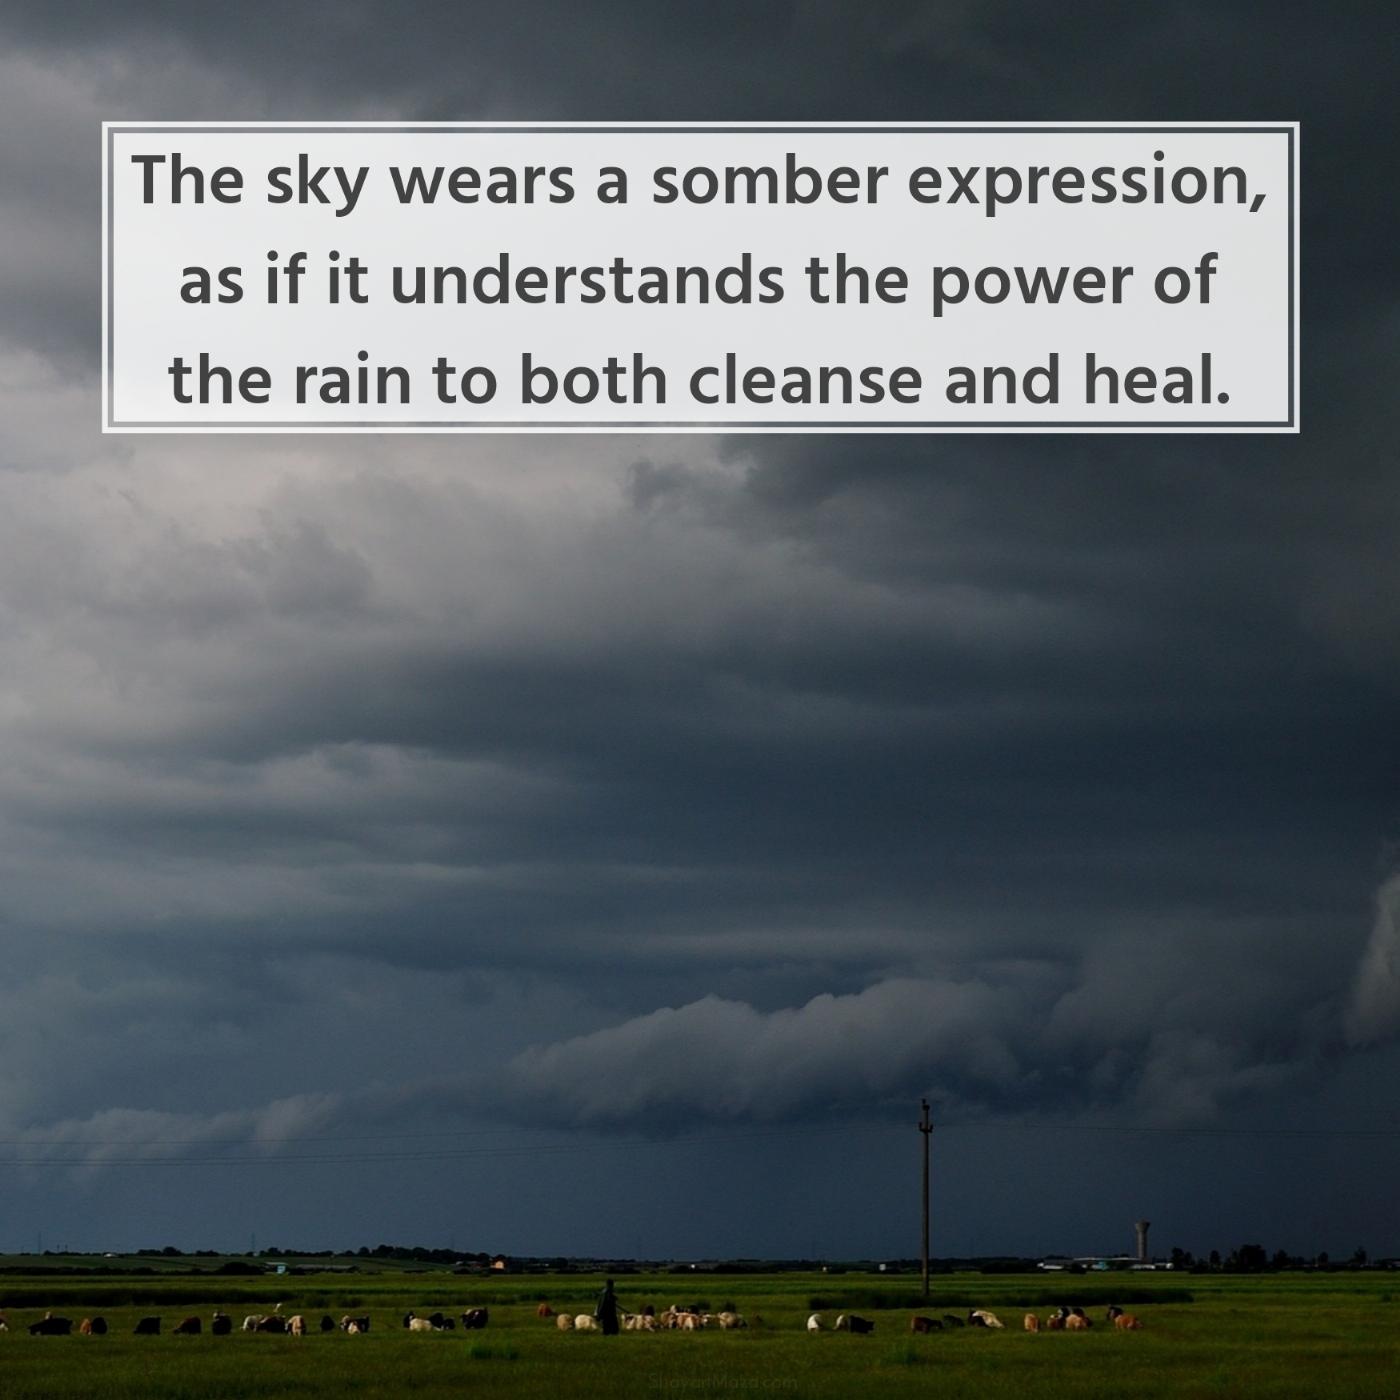 The sky wears a somber expression as if it understands